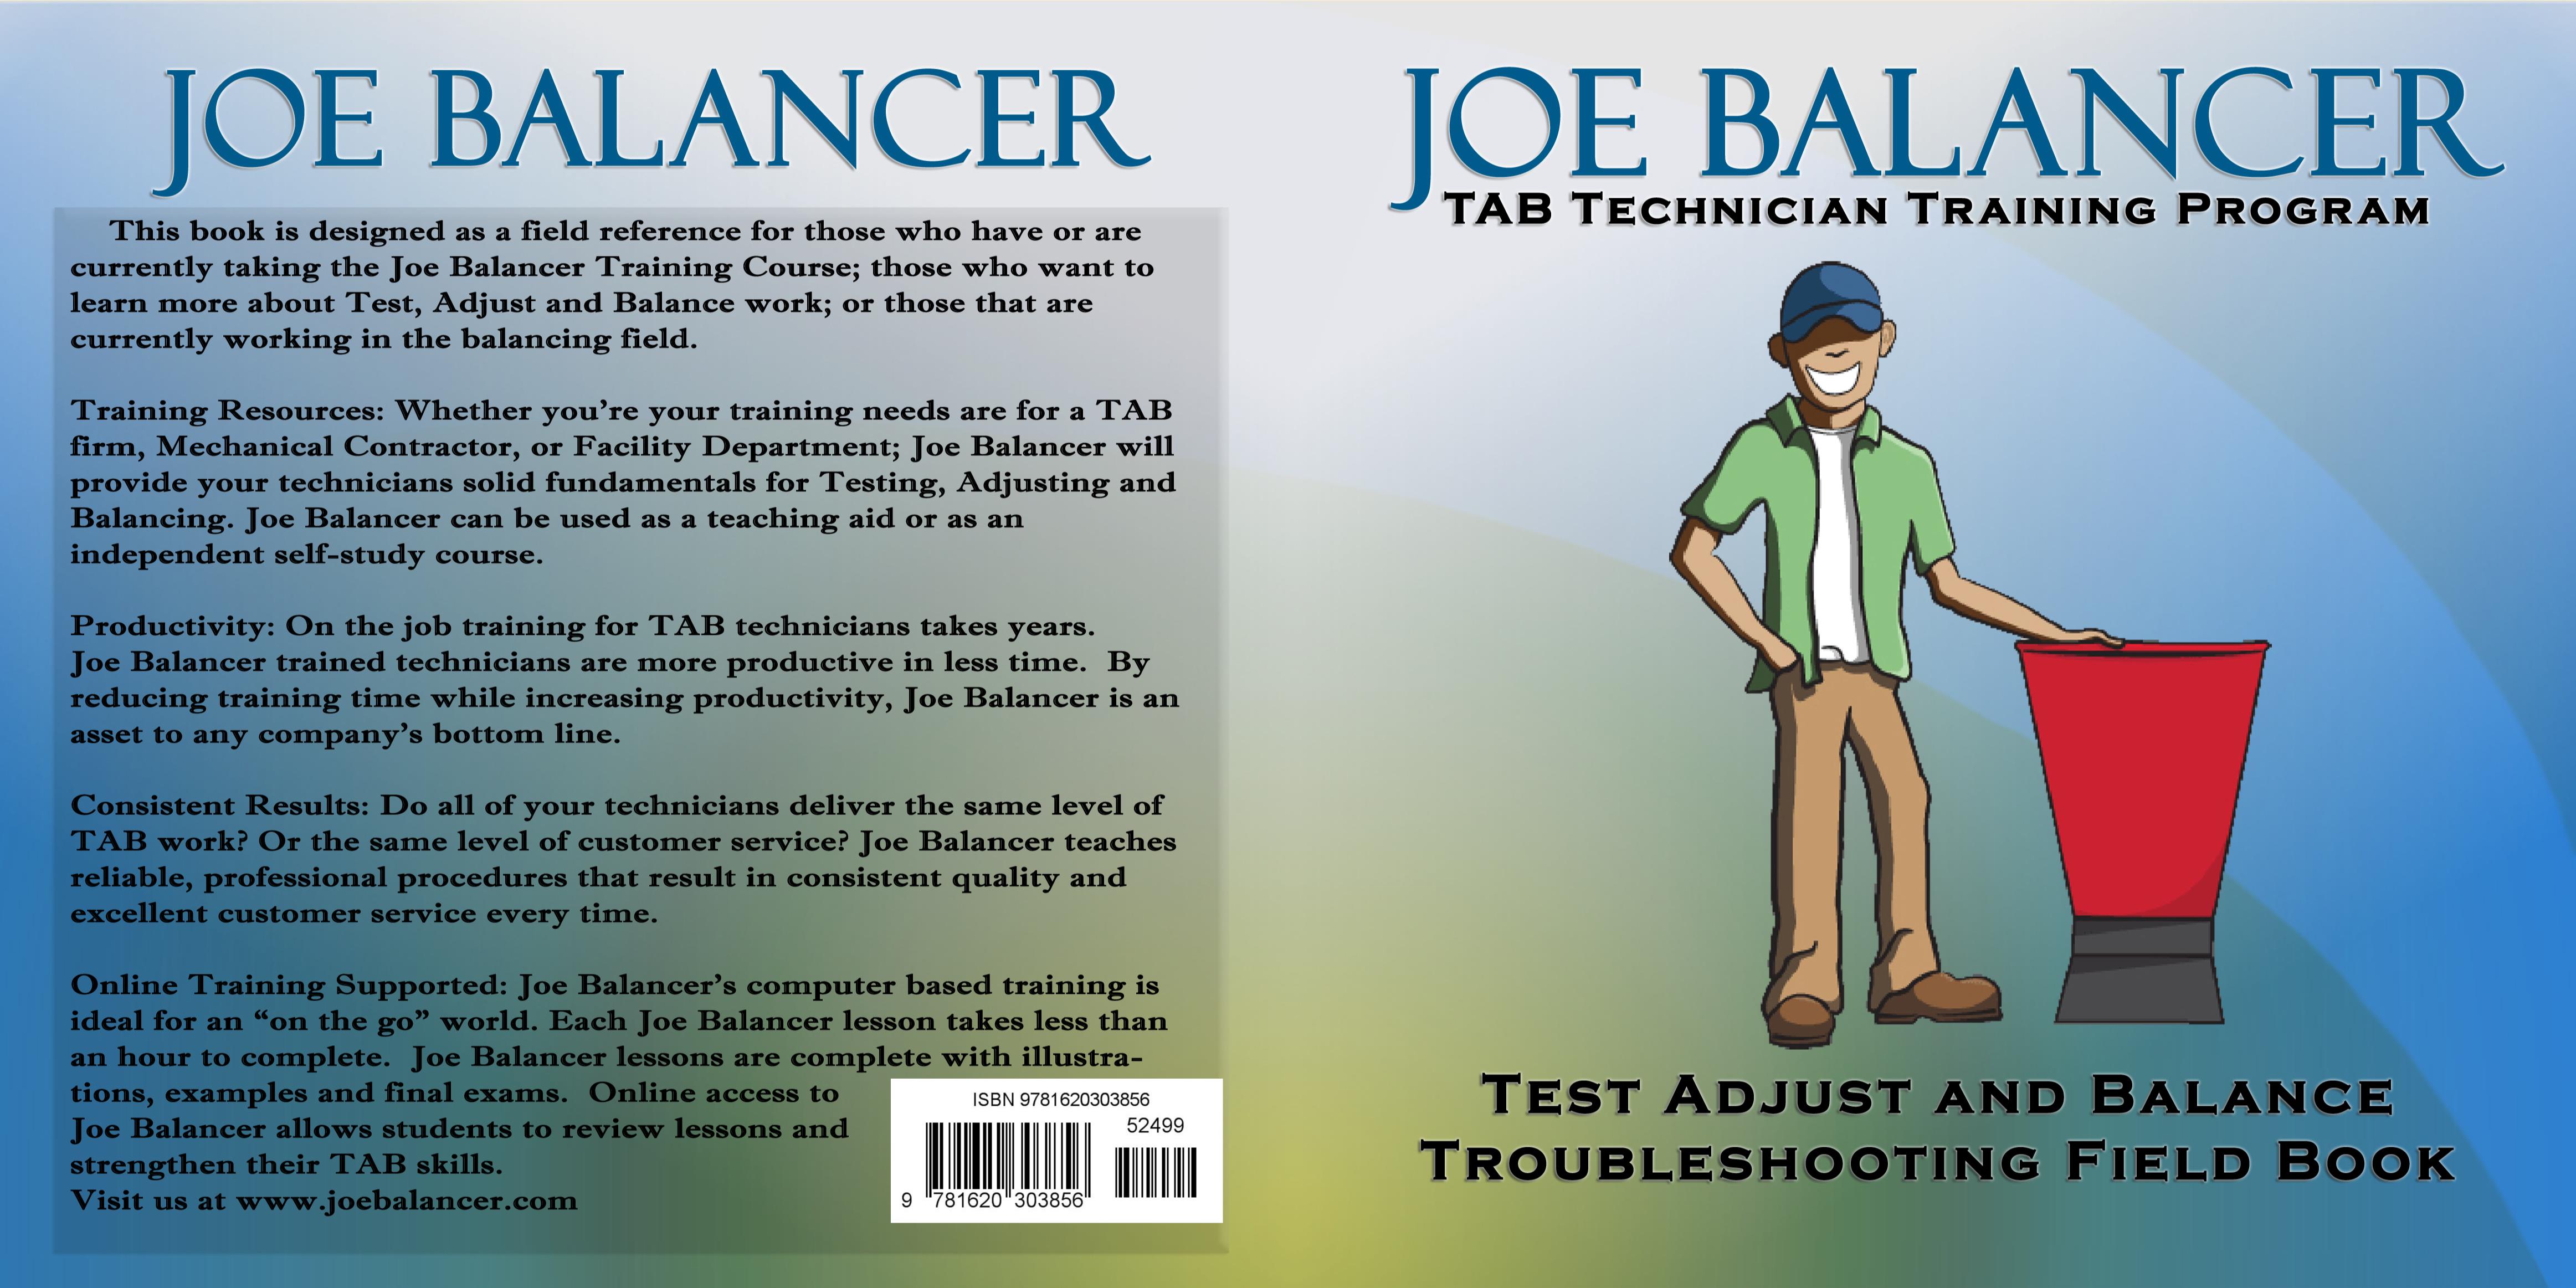 Test, Adjust, and Balance Troubleshooting Field Book cover image